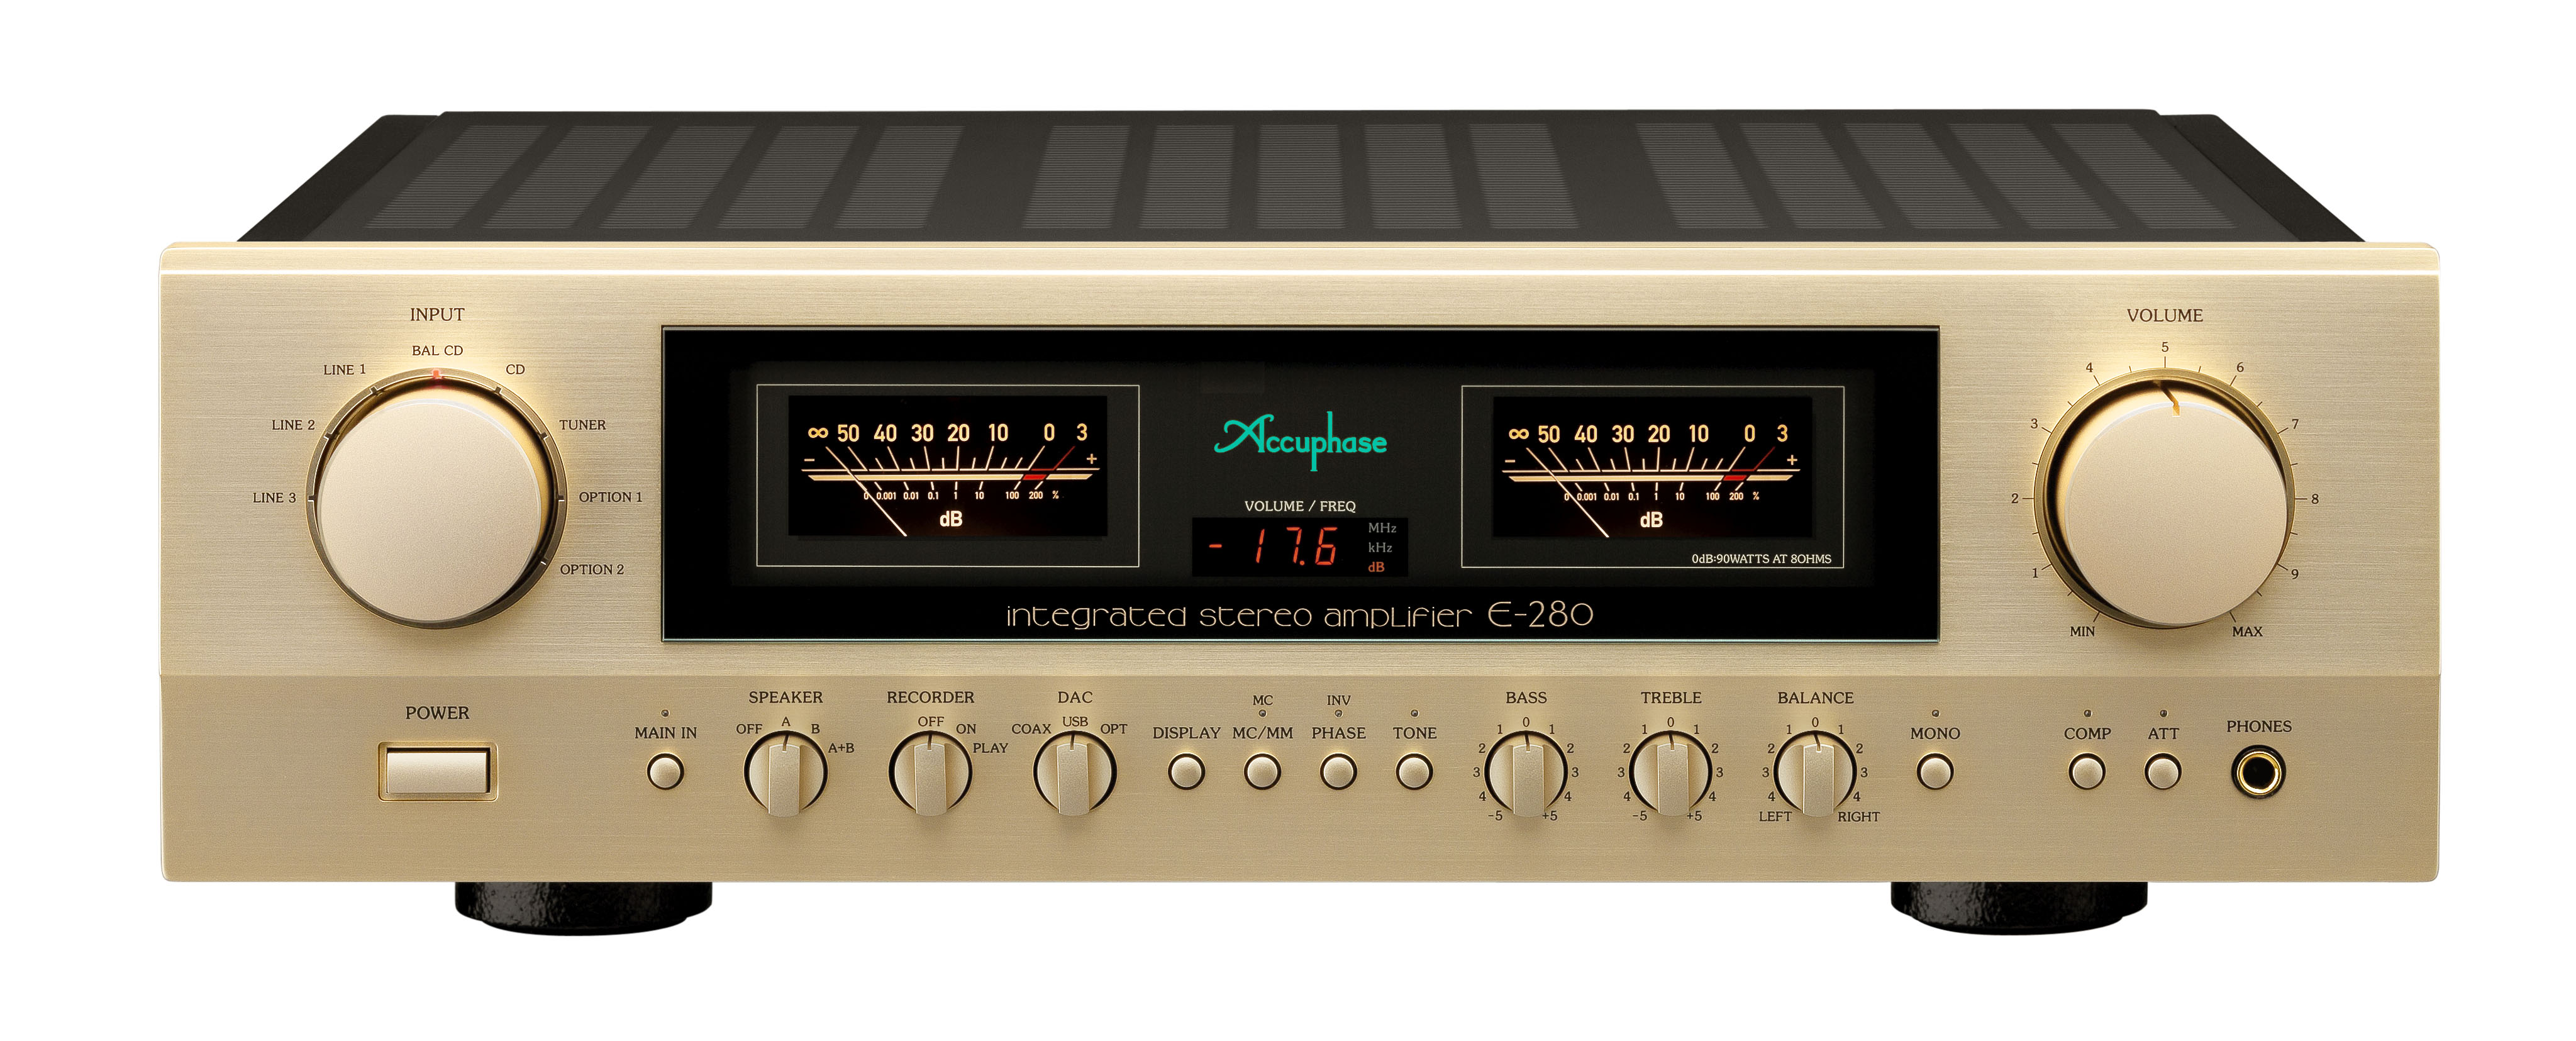 Accuphase E-280 (80)